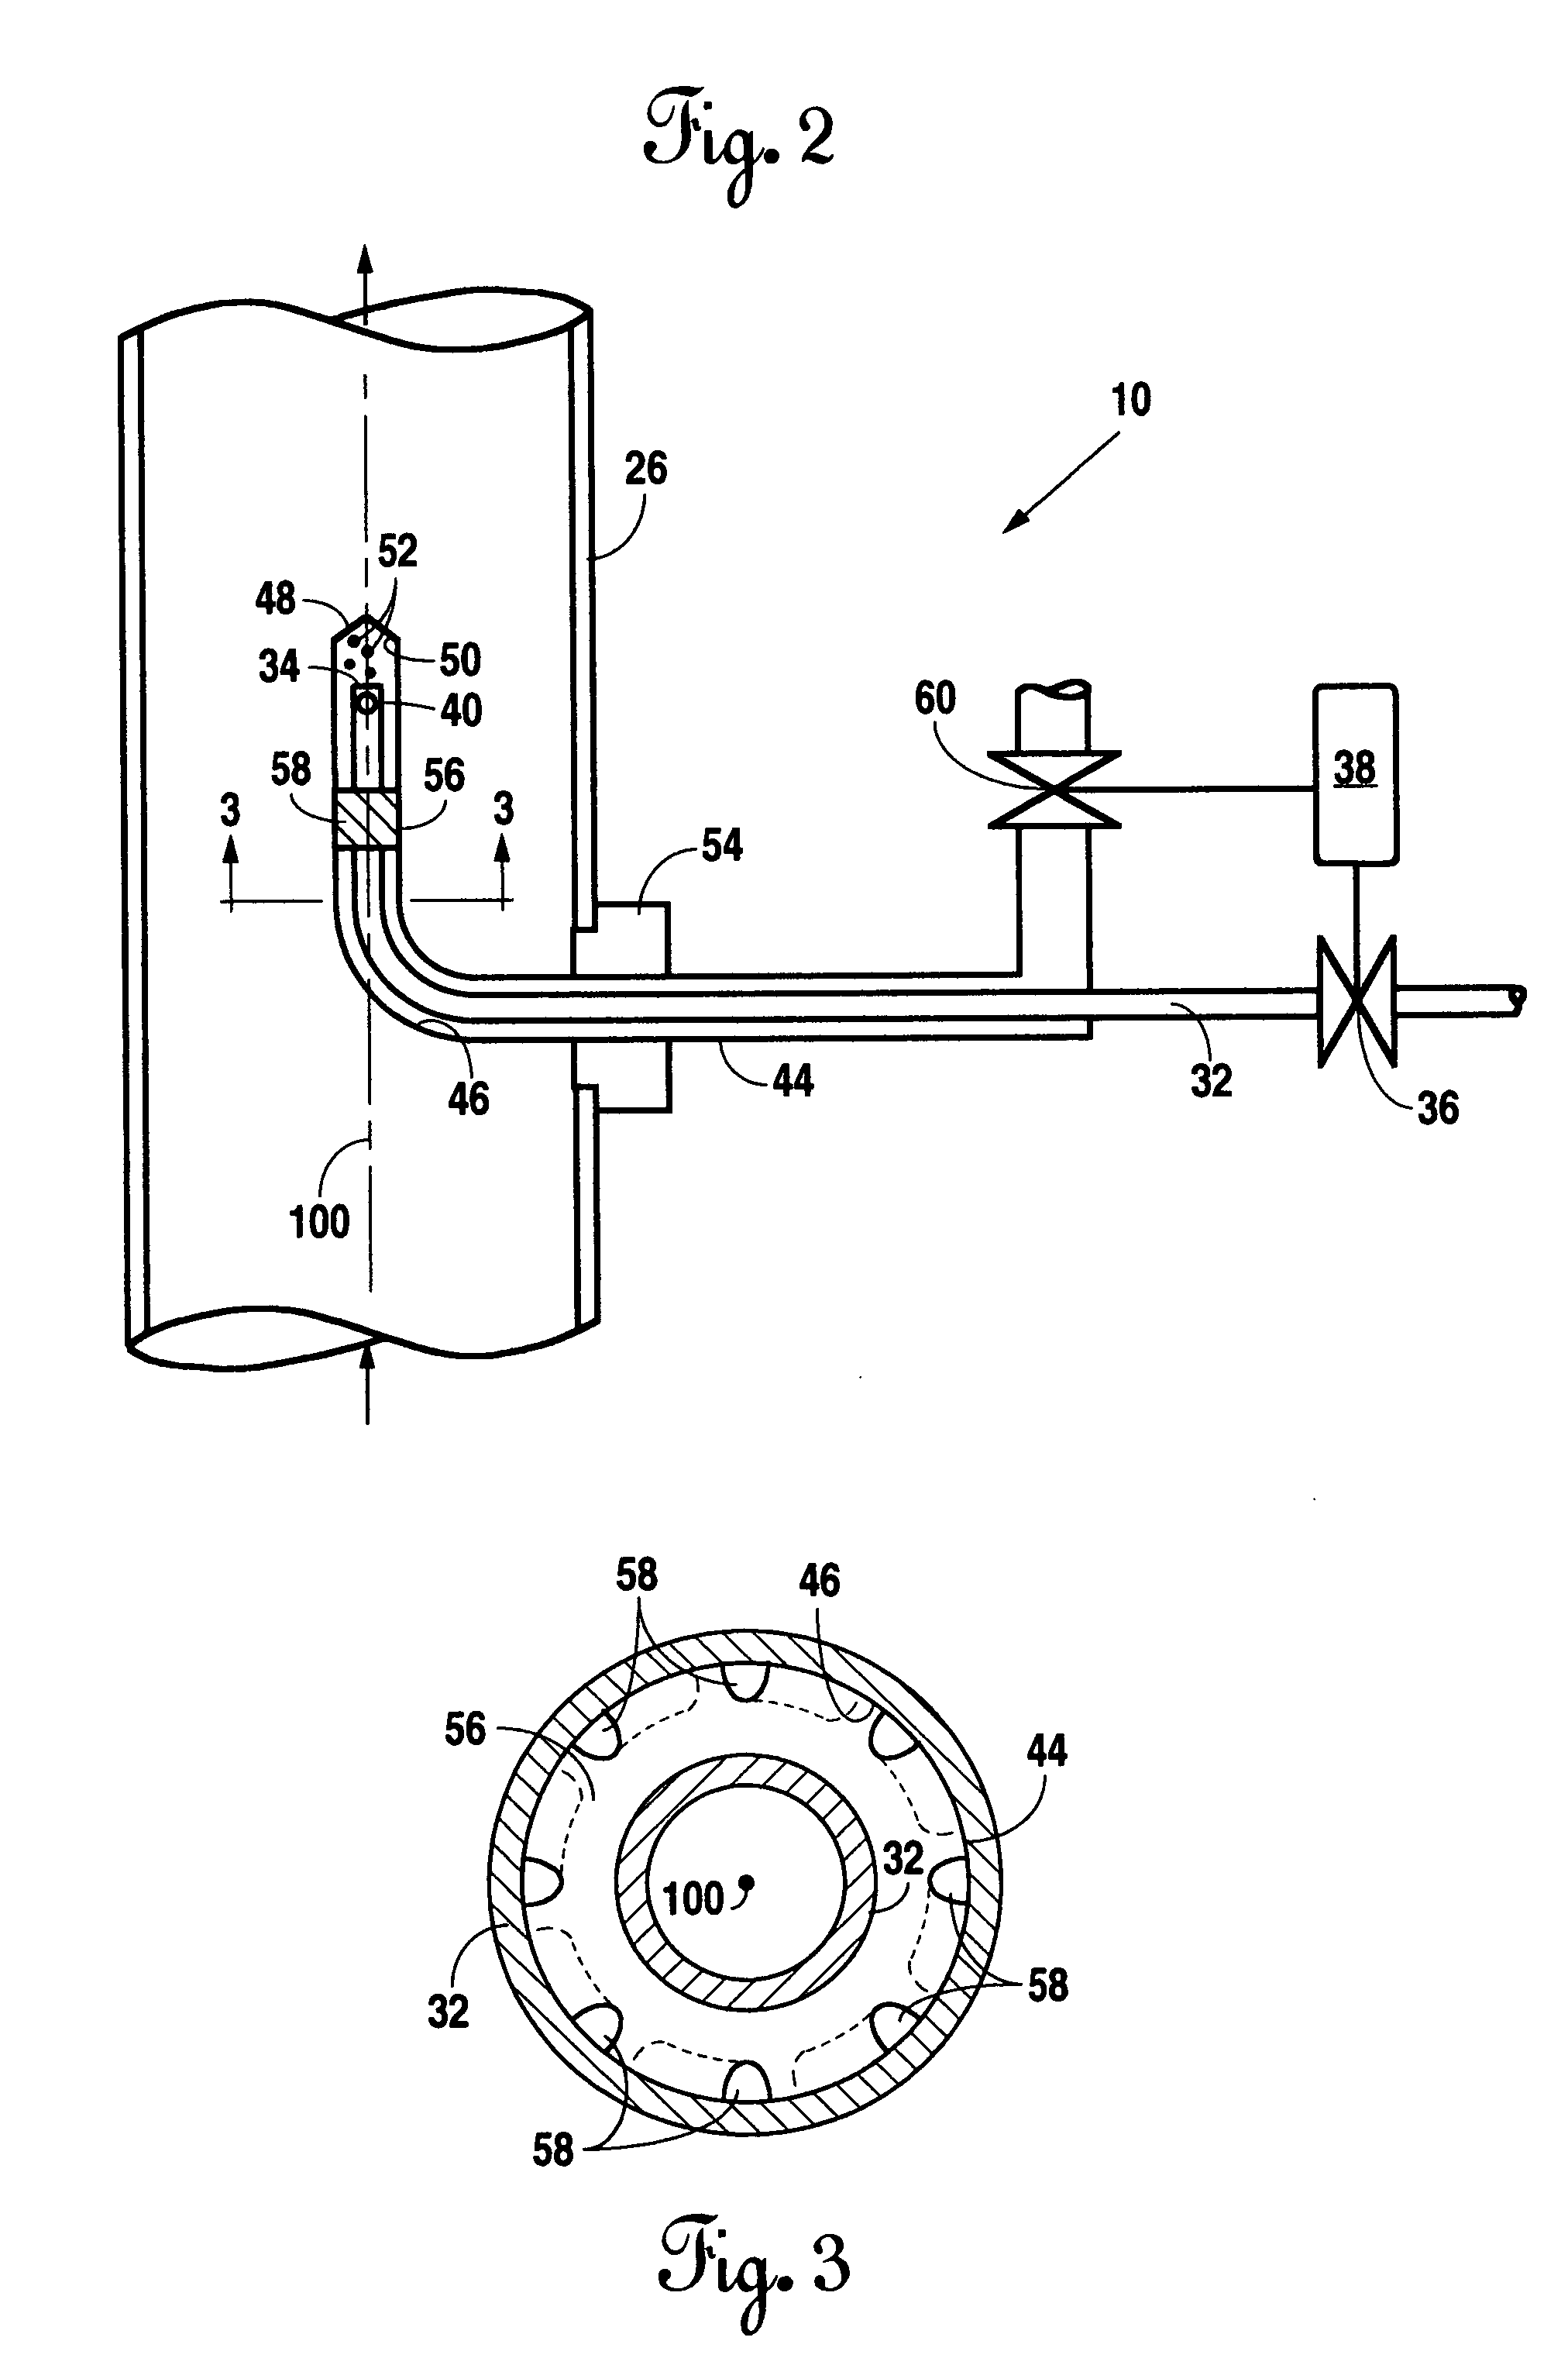 System and method for dispensing an aqueous urea solution into an exhaust gas stream